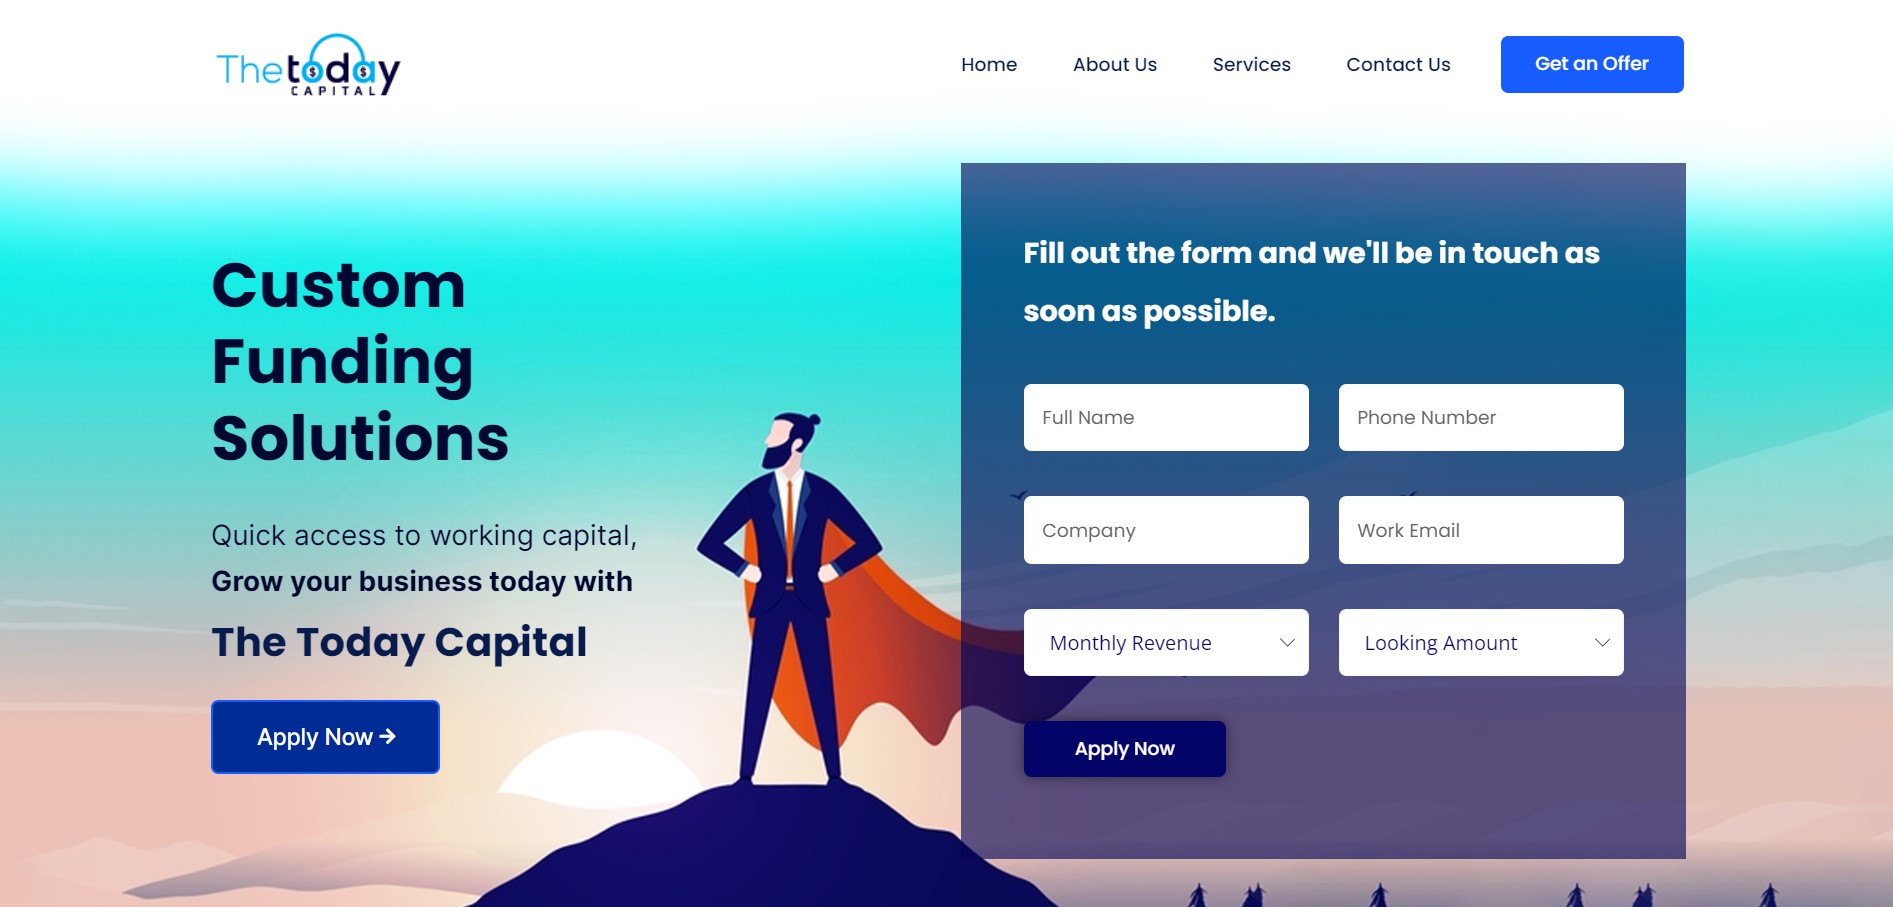 Website Design Project for The Today Capital